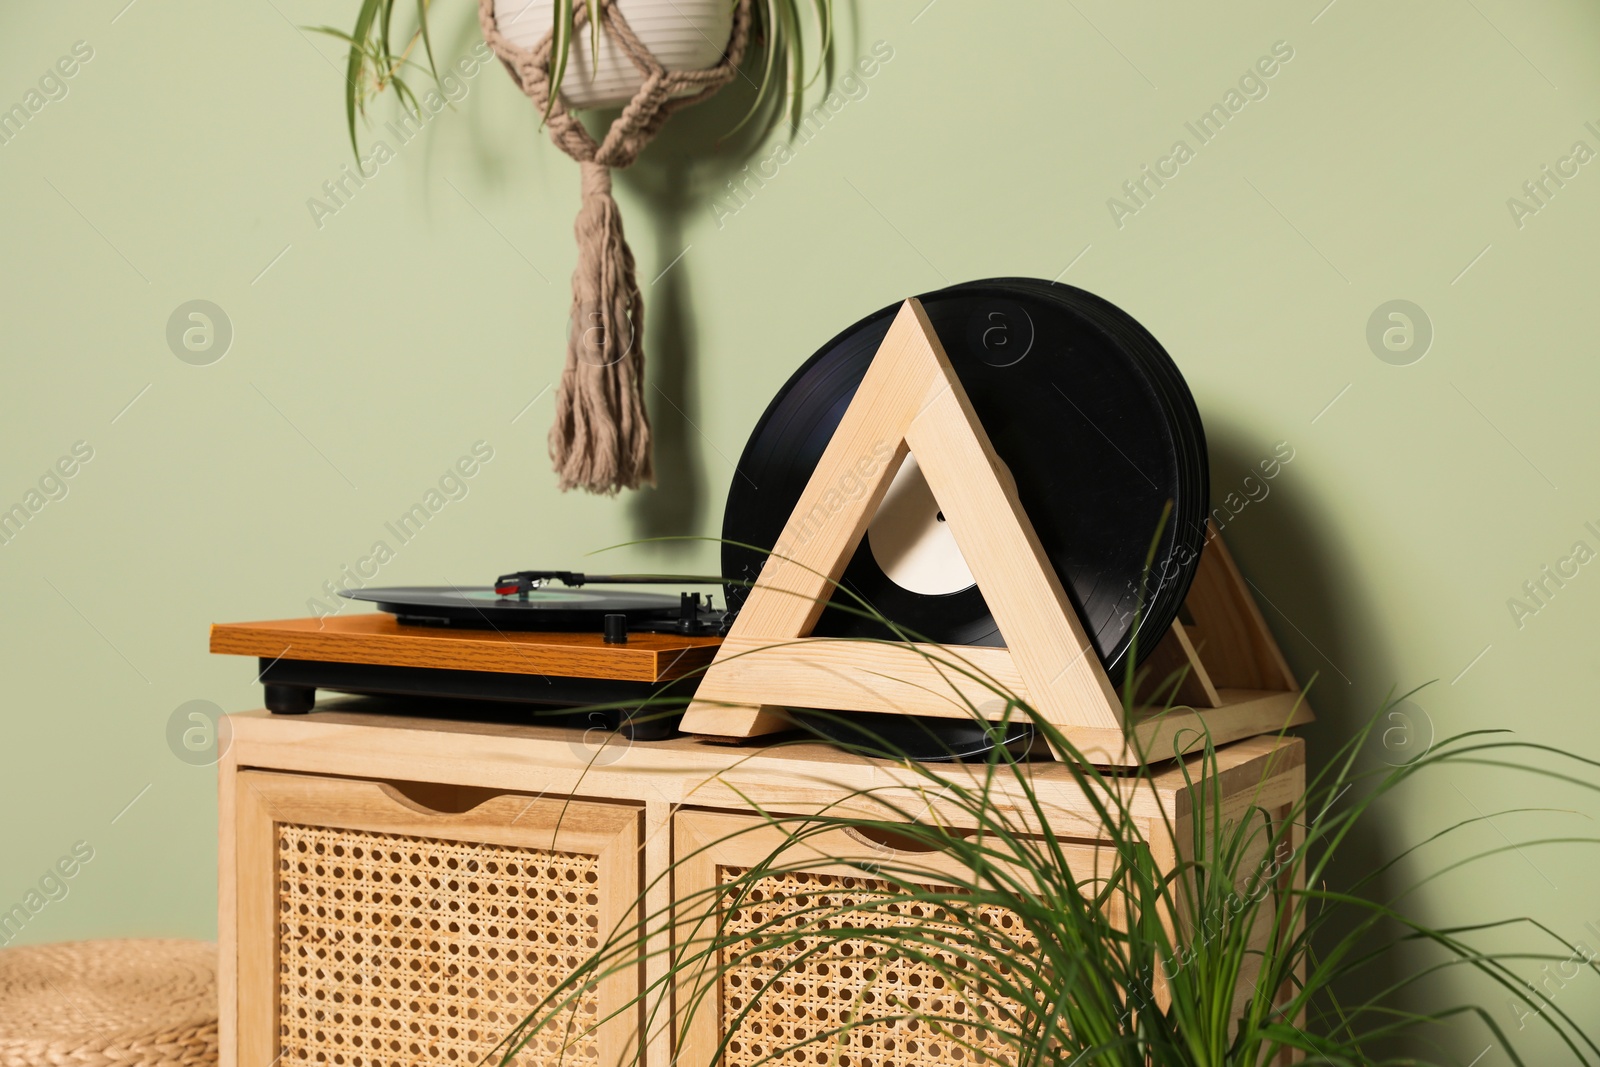 Photo of Vinyl records and player on wooden cabinet near light green wall